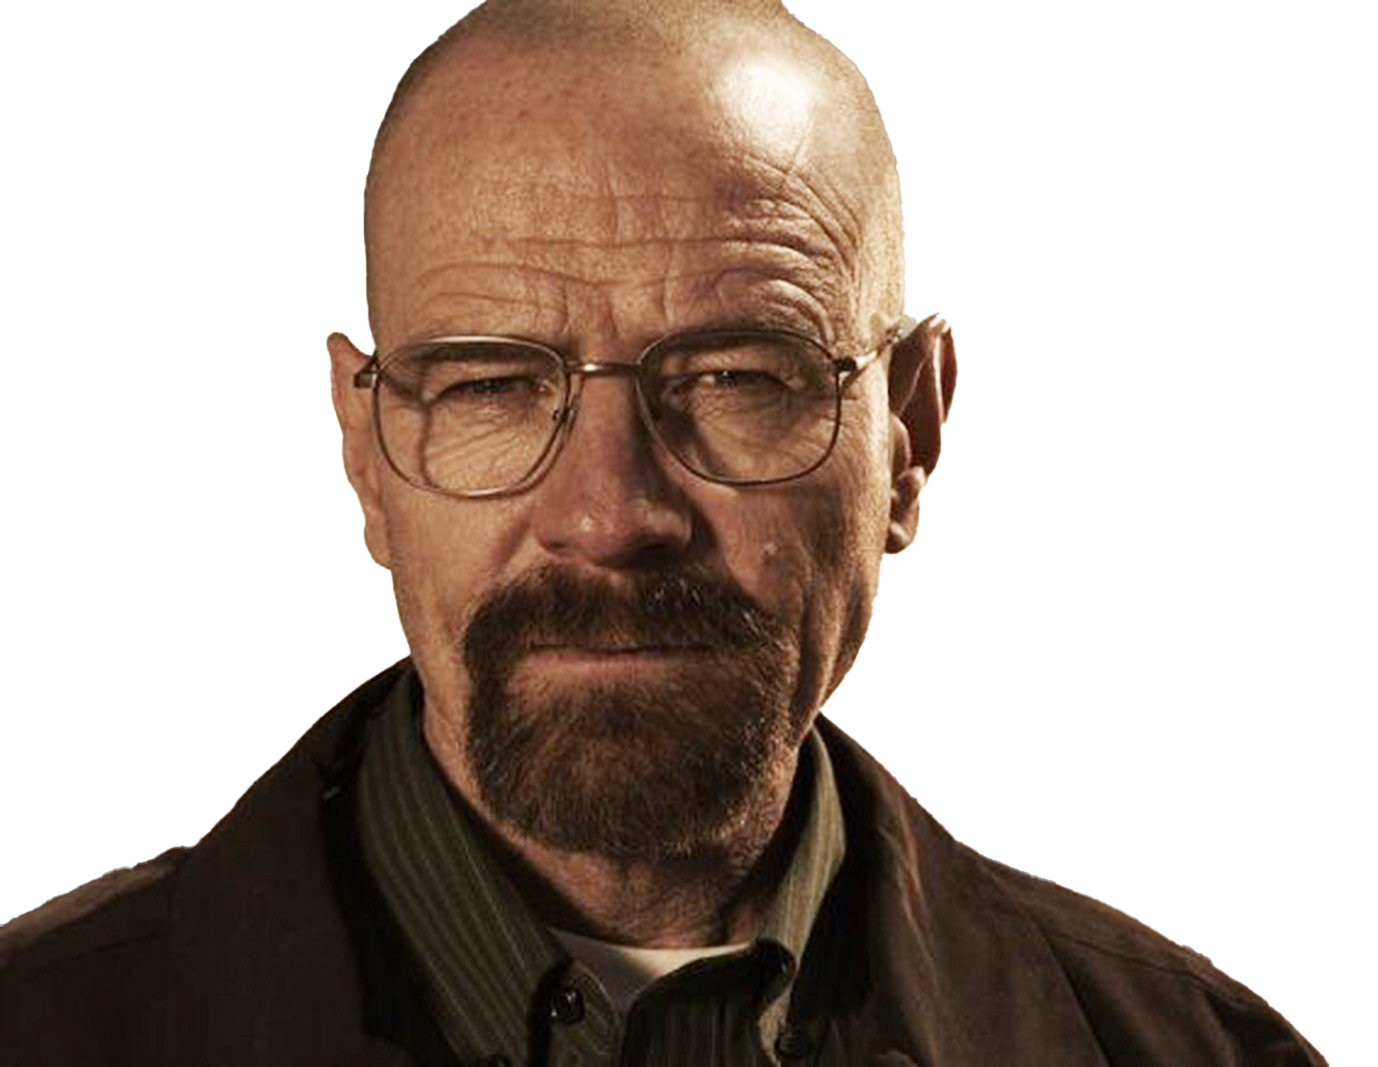 Breaking Bad Cast PNG Free Image